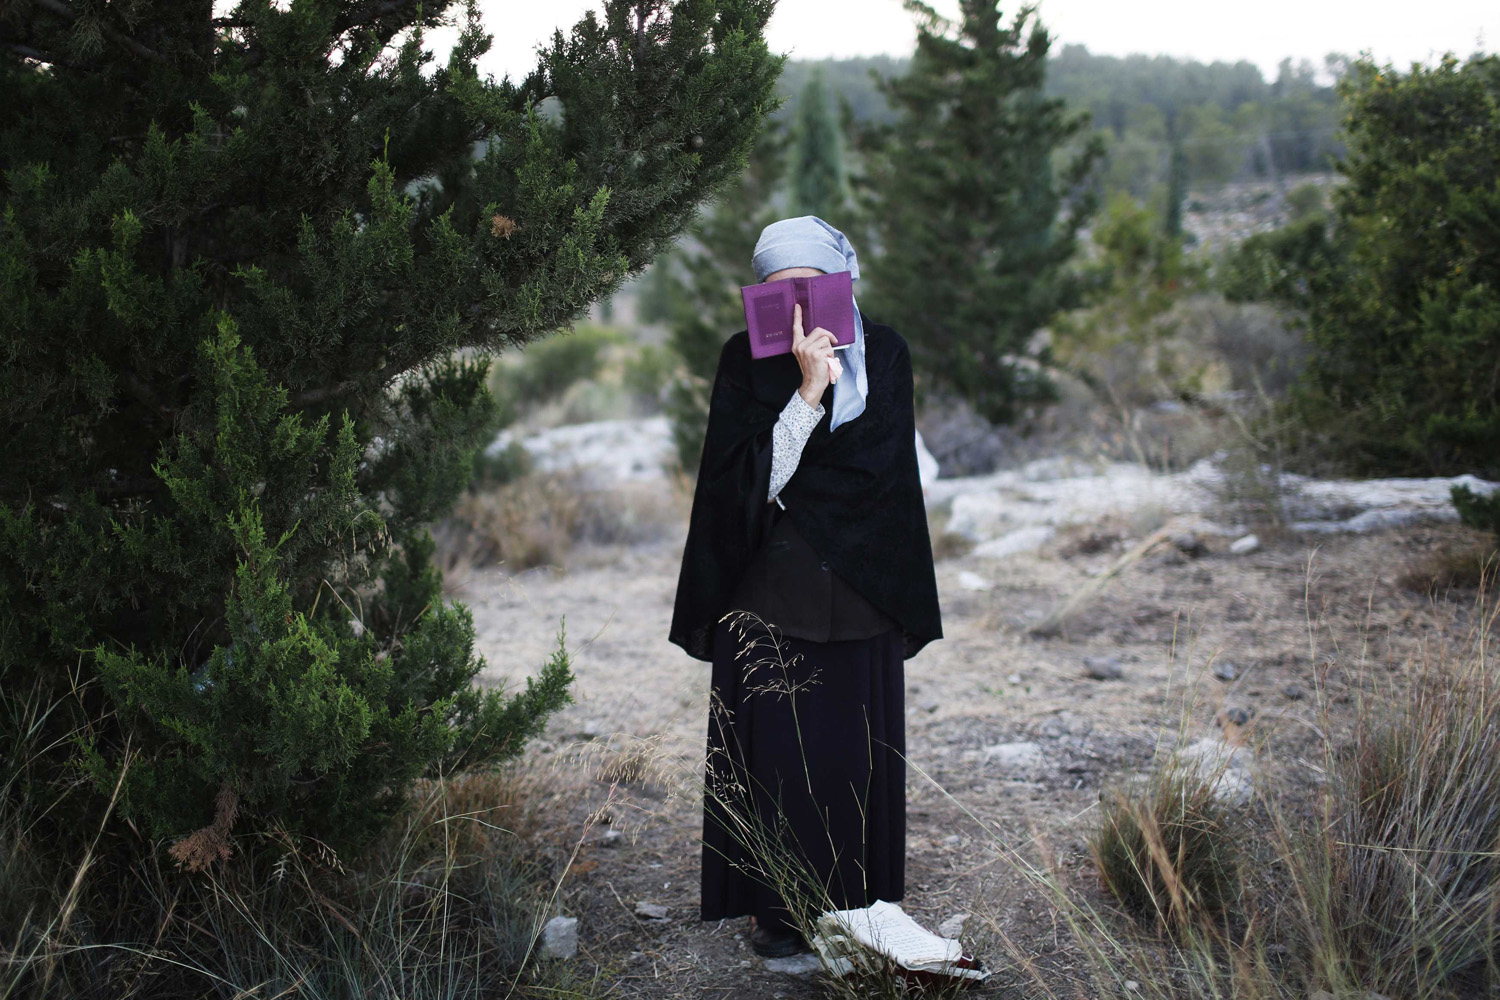 A Jewish woman prays during the joint funeral of the three Israeli teens who were abducted and killed in the occupied West Bank, in the Israeli city of Modi'in